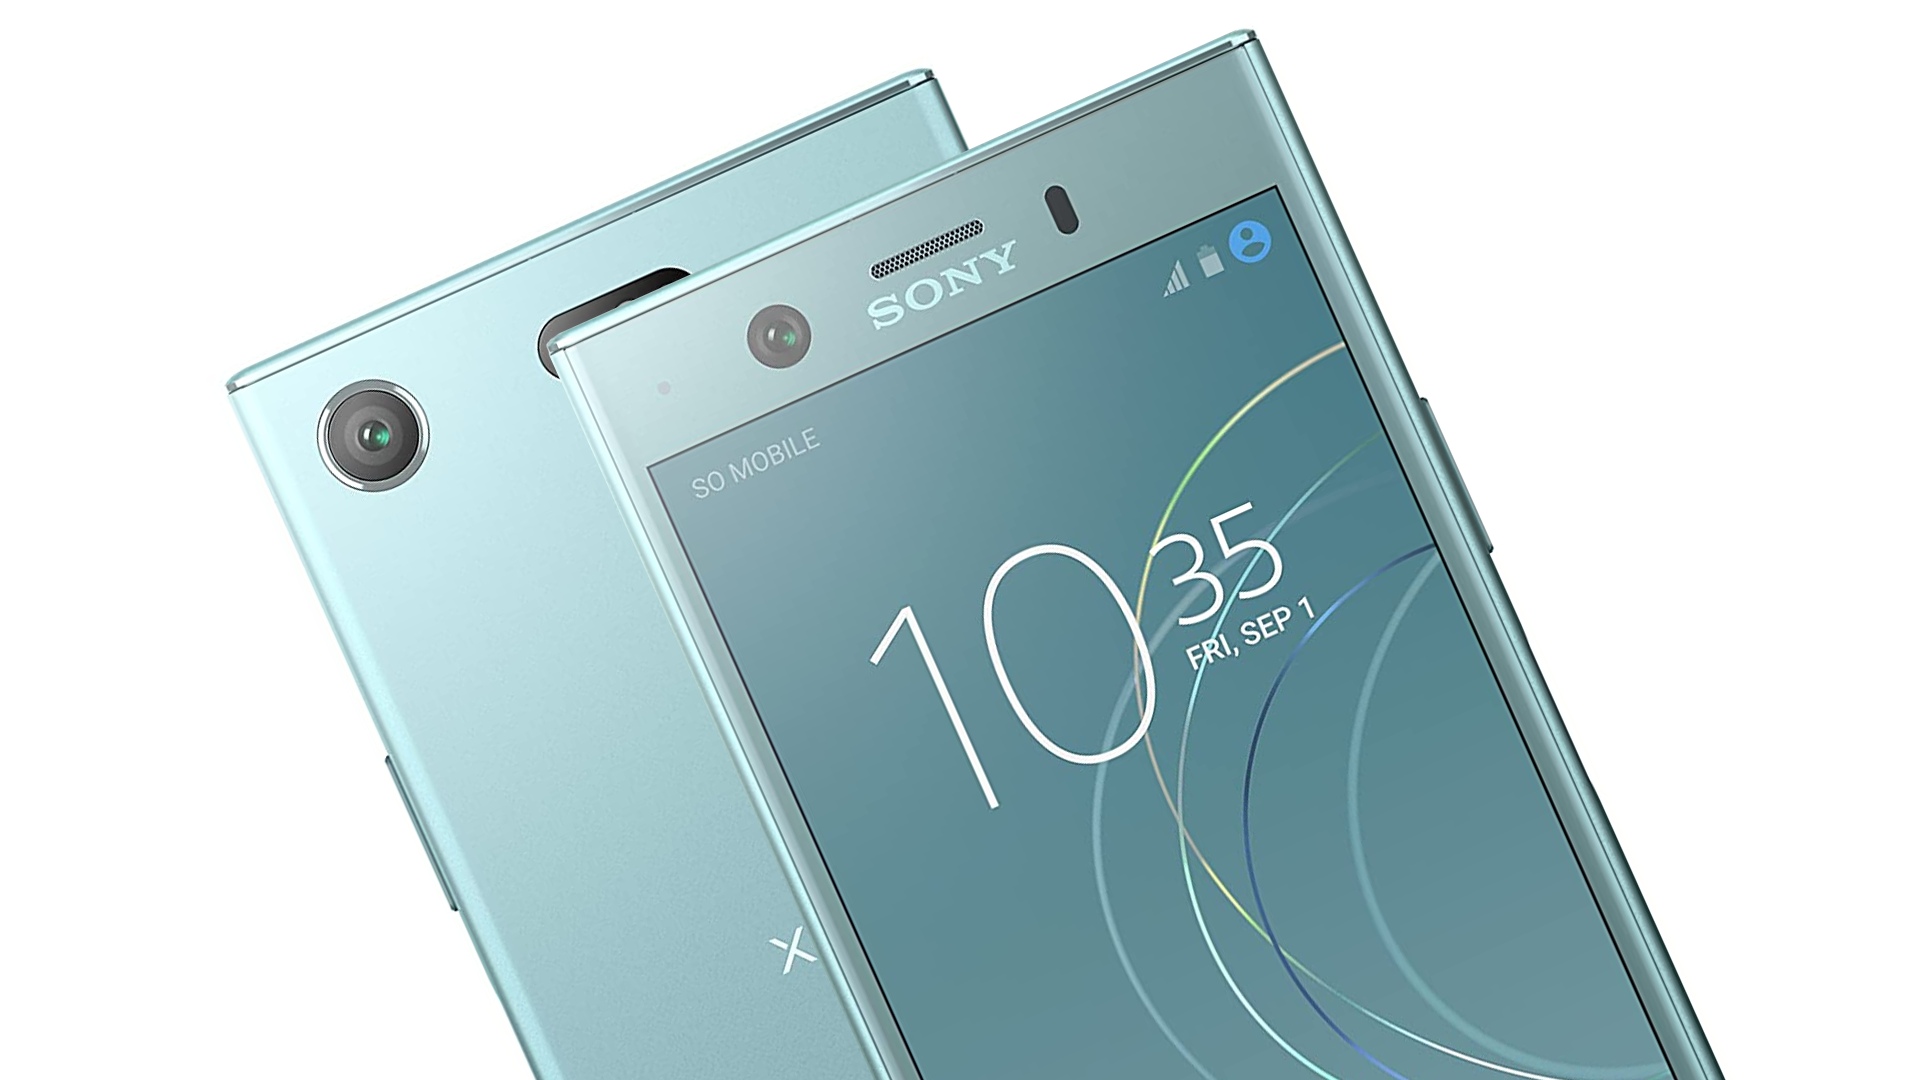 The Sony Xperia XZ1 Compact, a plastic phone from 2017.